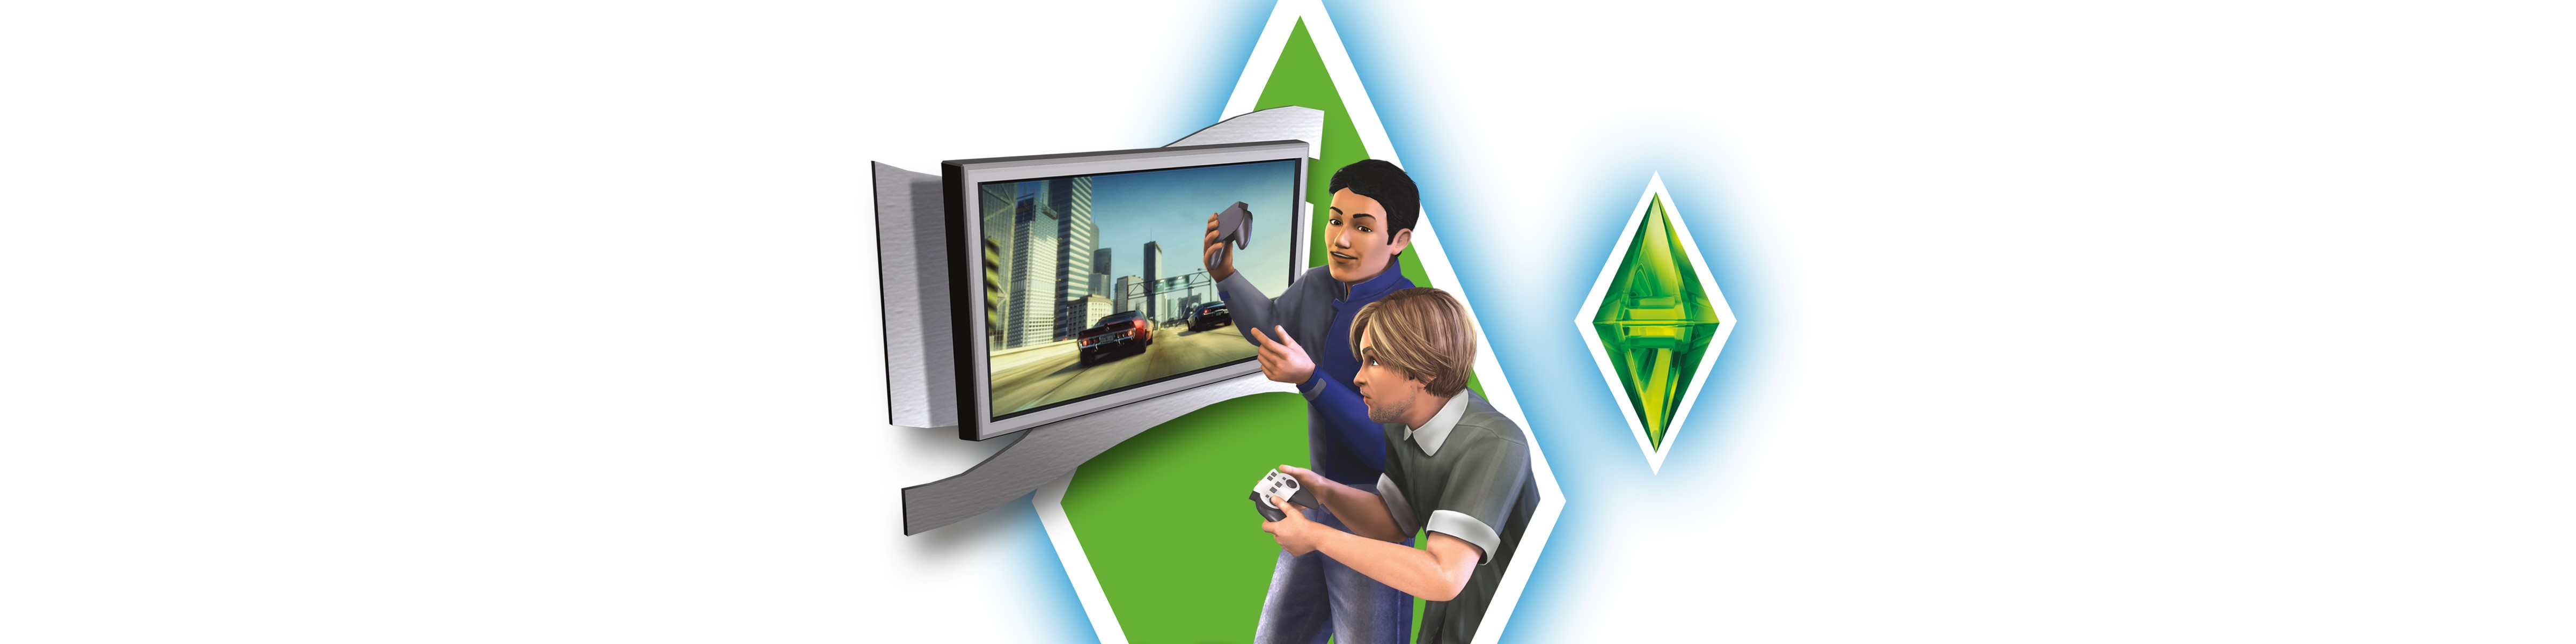 play sims 3 online free full version